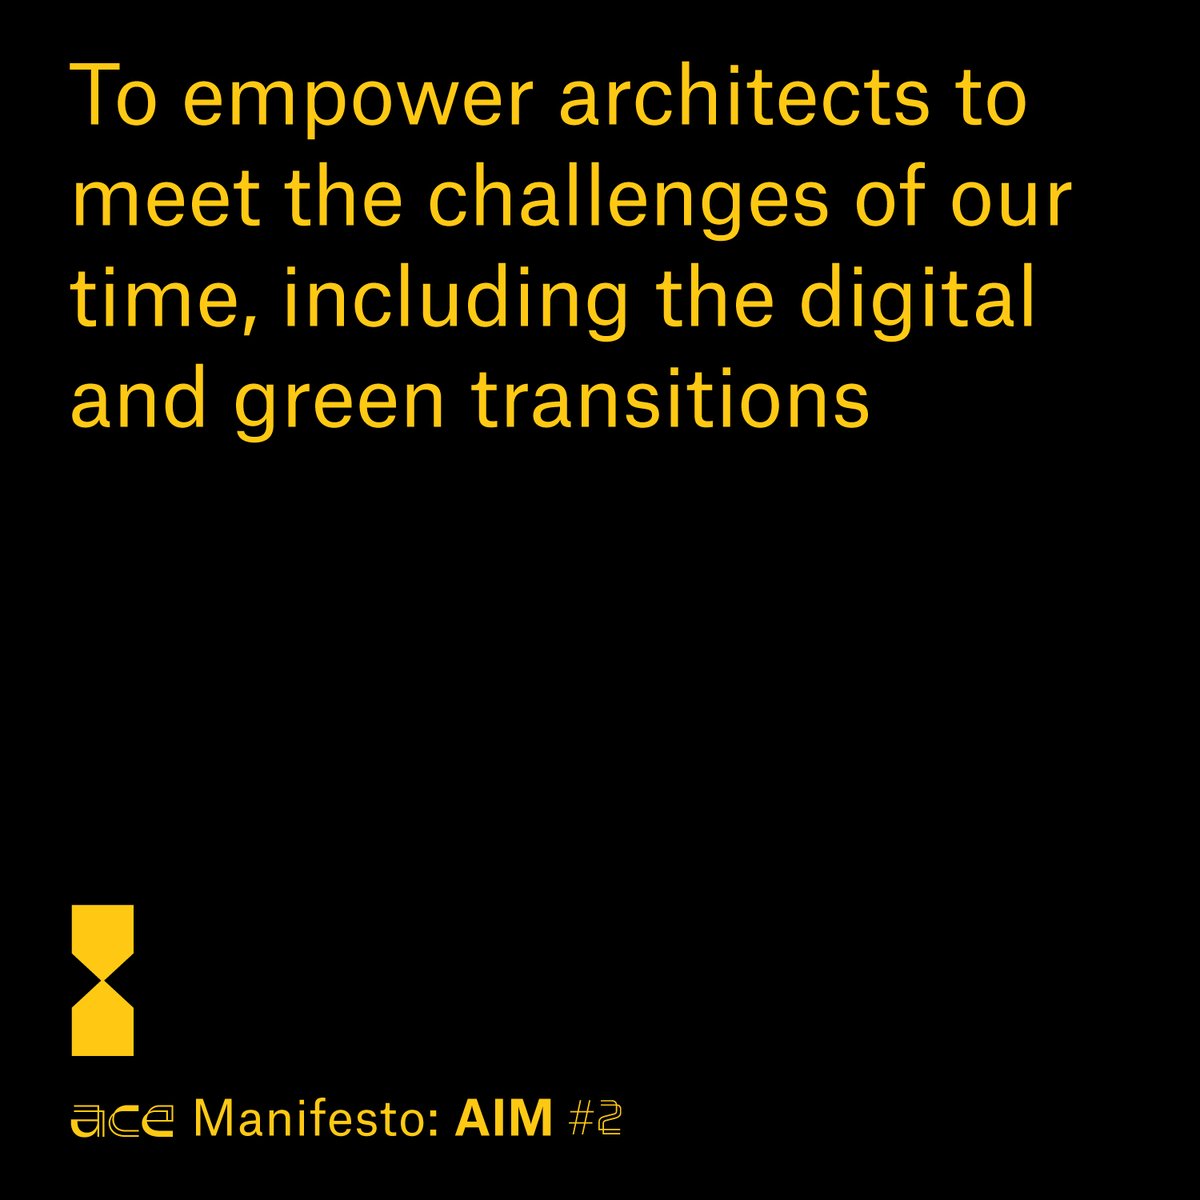 Time to act! ACE Manifesto #aim #2 Download + share the ACE Manifesto for the #EUelections #architecture #ace #cae #architects #european #UseYourVote #EUelections2024 #2024EUelections